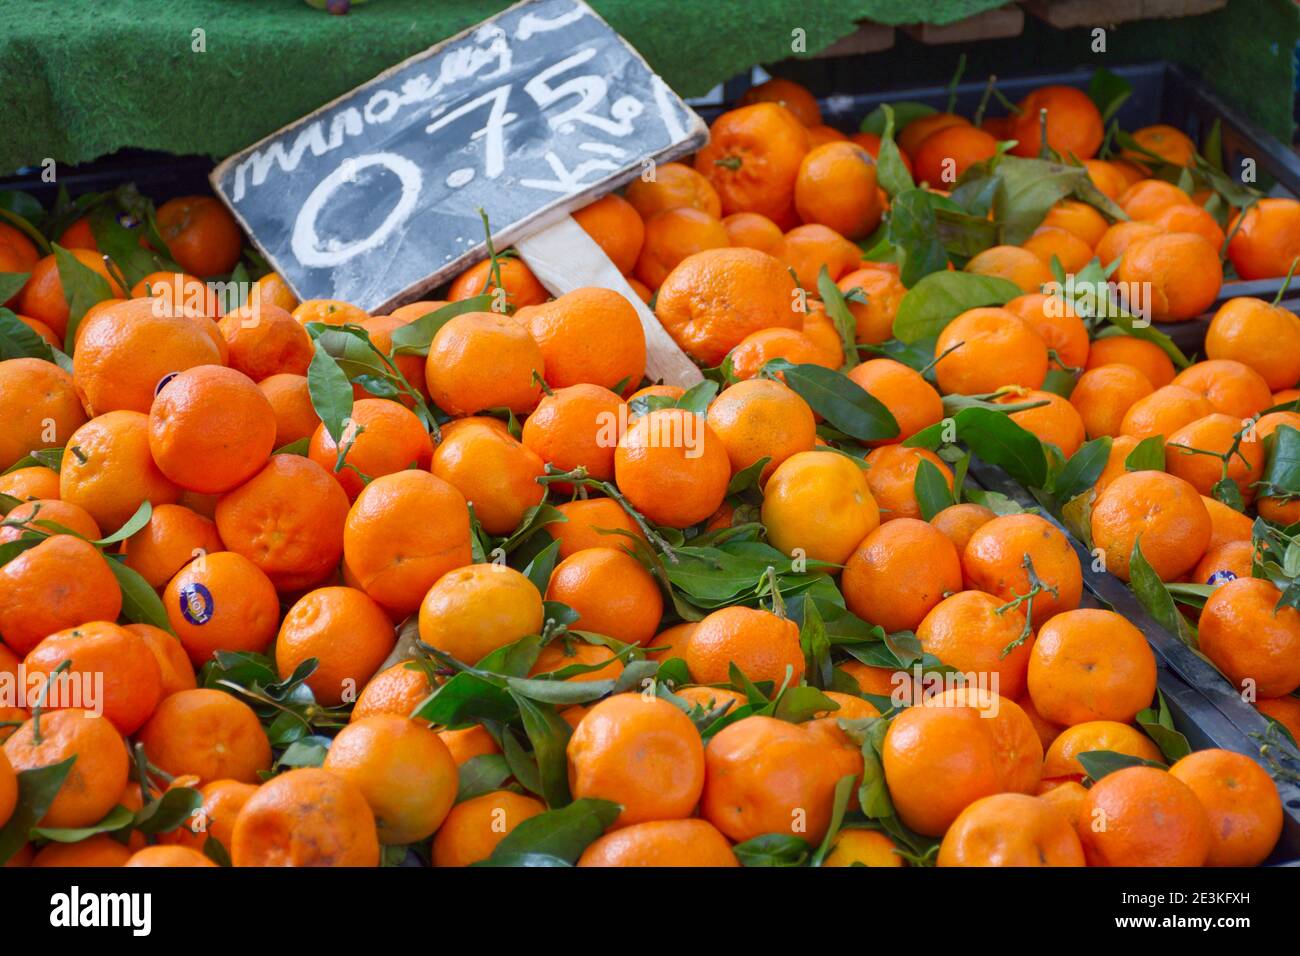 Oranges for sale at the fresh produce market Stock Photo